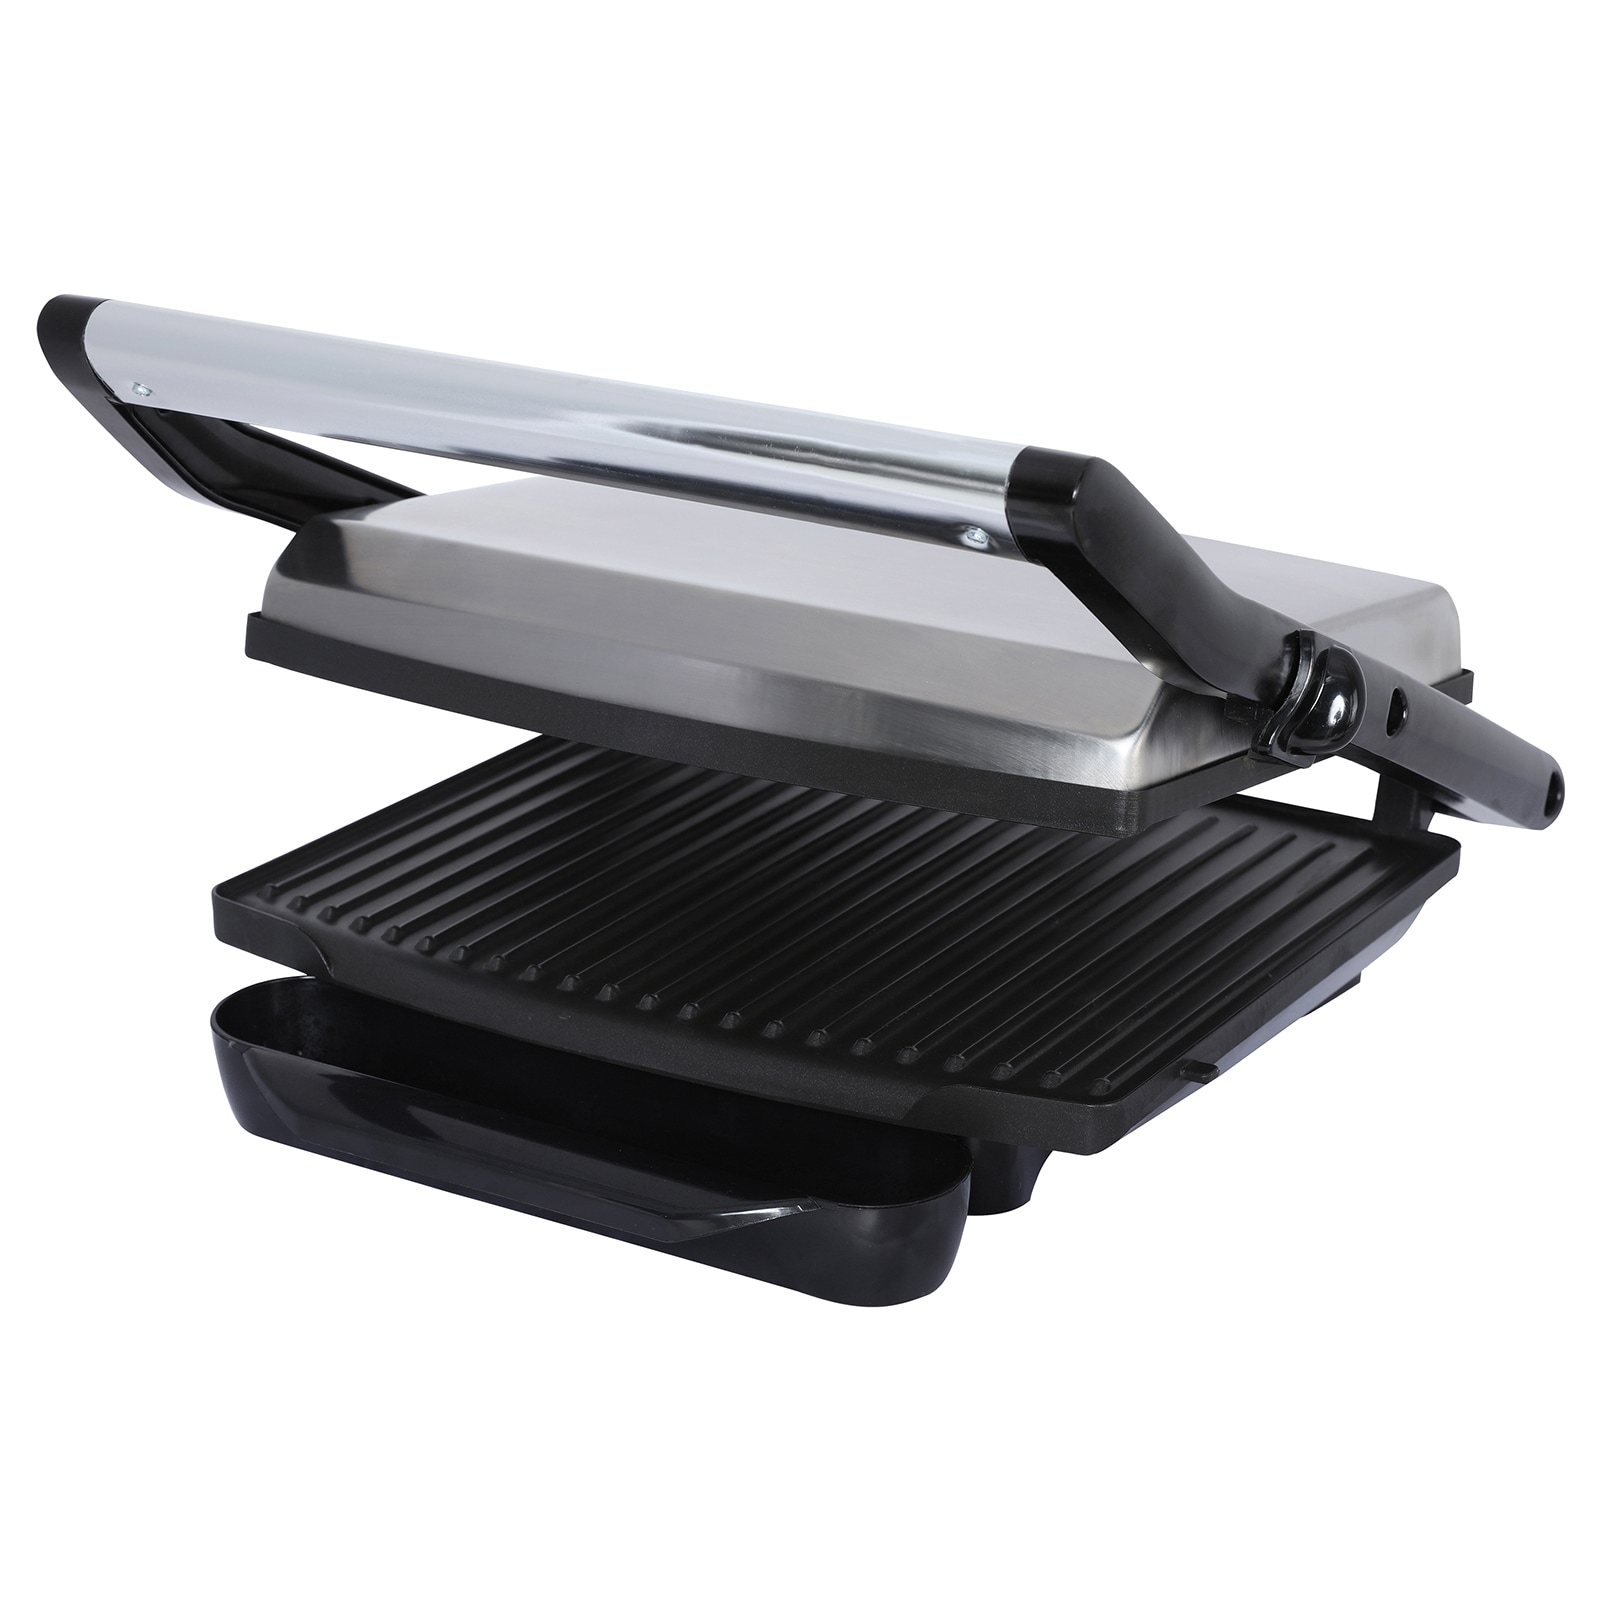 https://ak1.ostkcdn.com/images/products/is/images/direct/48c021978929a06ad8df6c52bd2918233d94a71a/Brentwood-Compact-Non-Stick-Panini-Press-%26-Sandwich-Maker.jpg